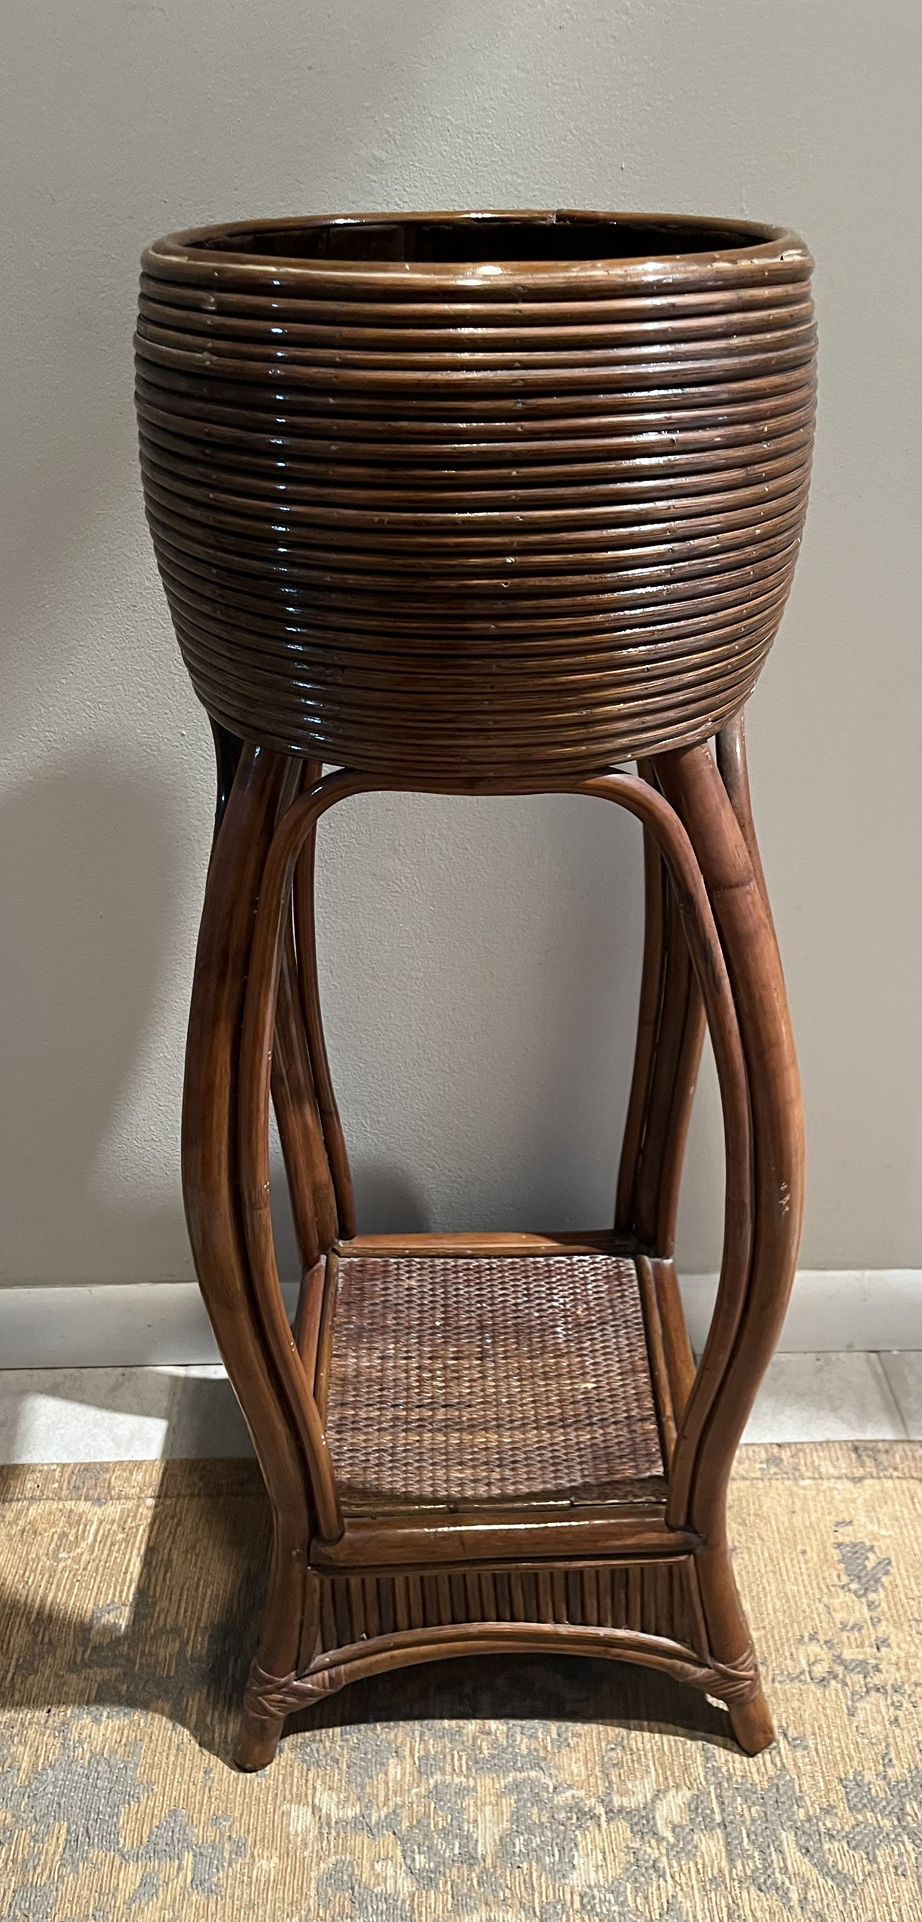 VINTAGE BAMBOO WOOVEN PLANT STAND